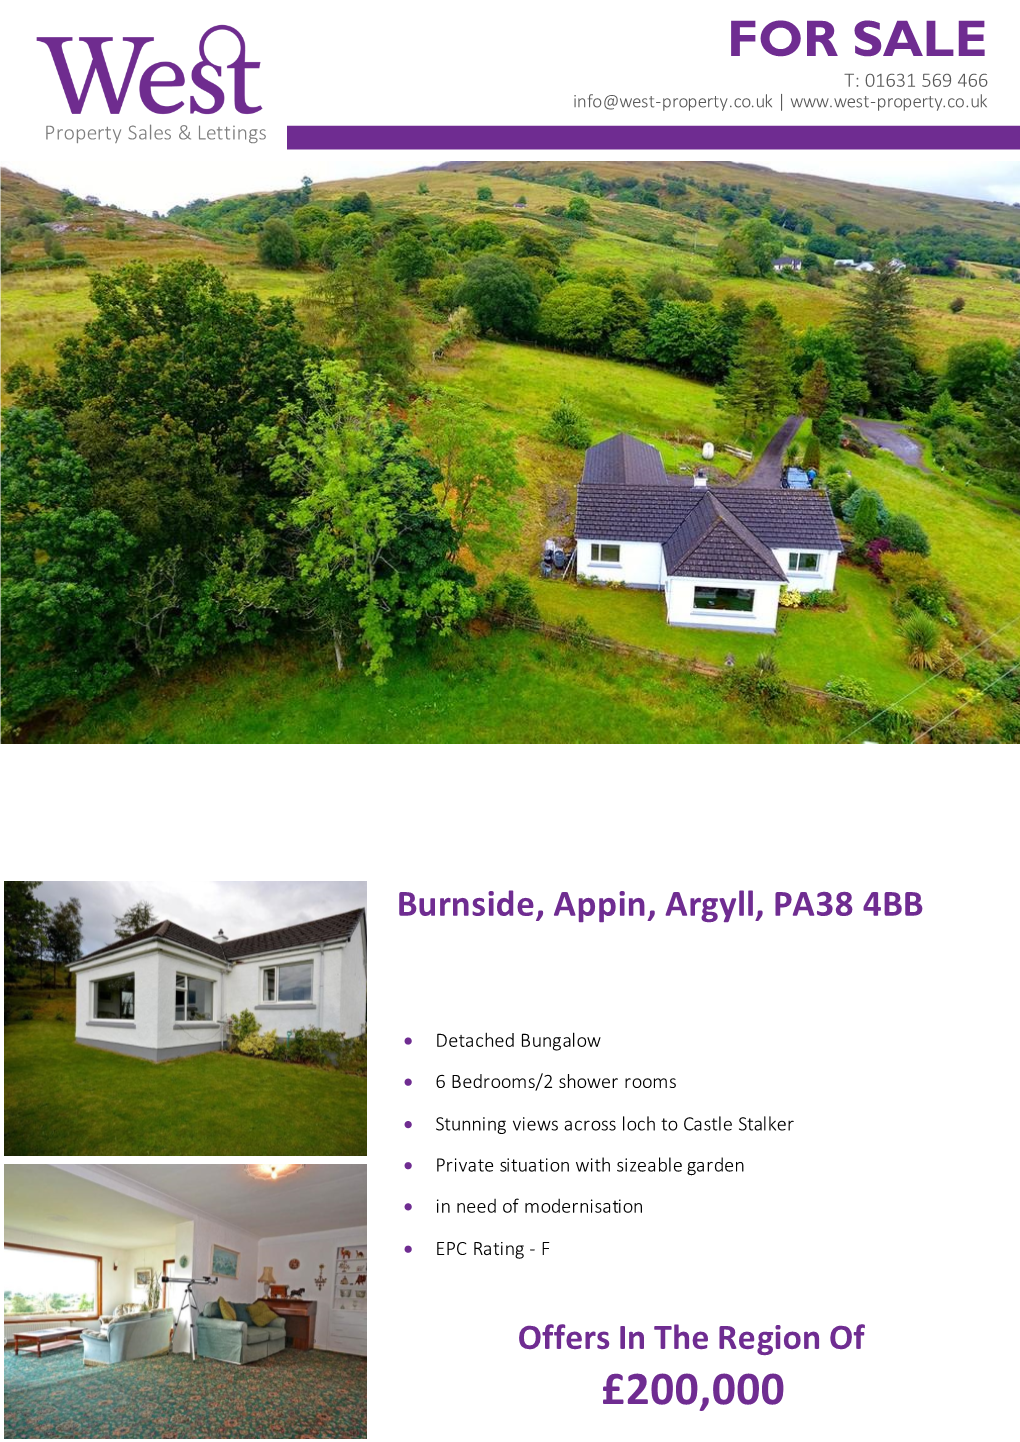 FOR SALE Burnside, Appin, Argyll, PA38